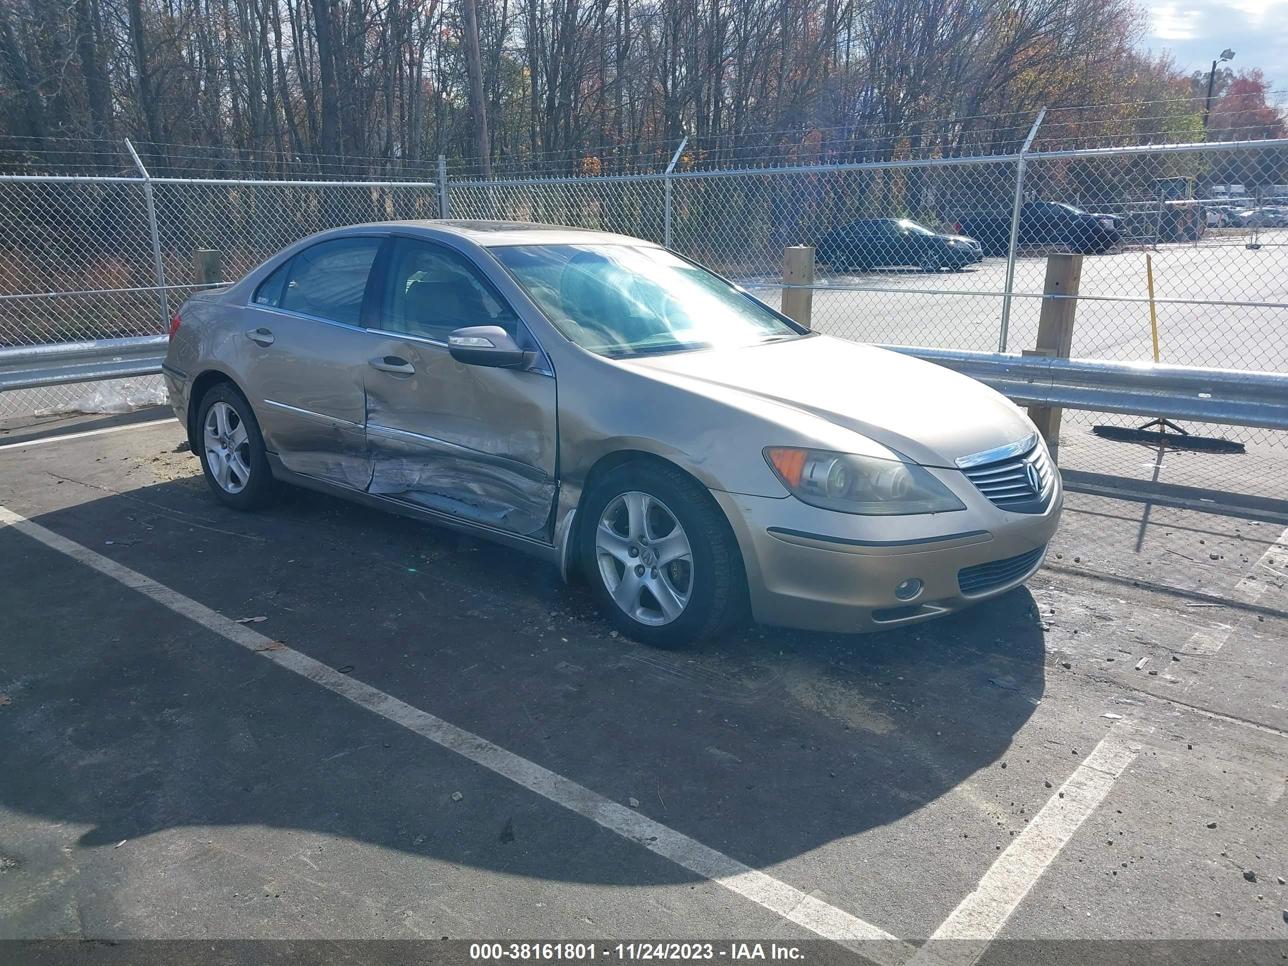 vin: JH4KB16575C007365 JH4KB16575C007365 2005 acura rl 3500 for Sale in 27263, 6695 Auction Road, High Point, USA